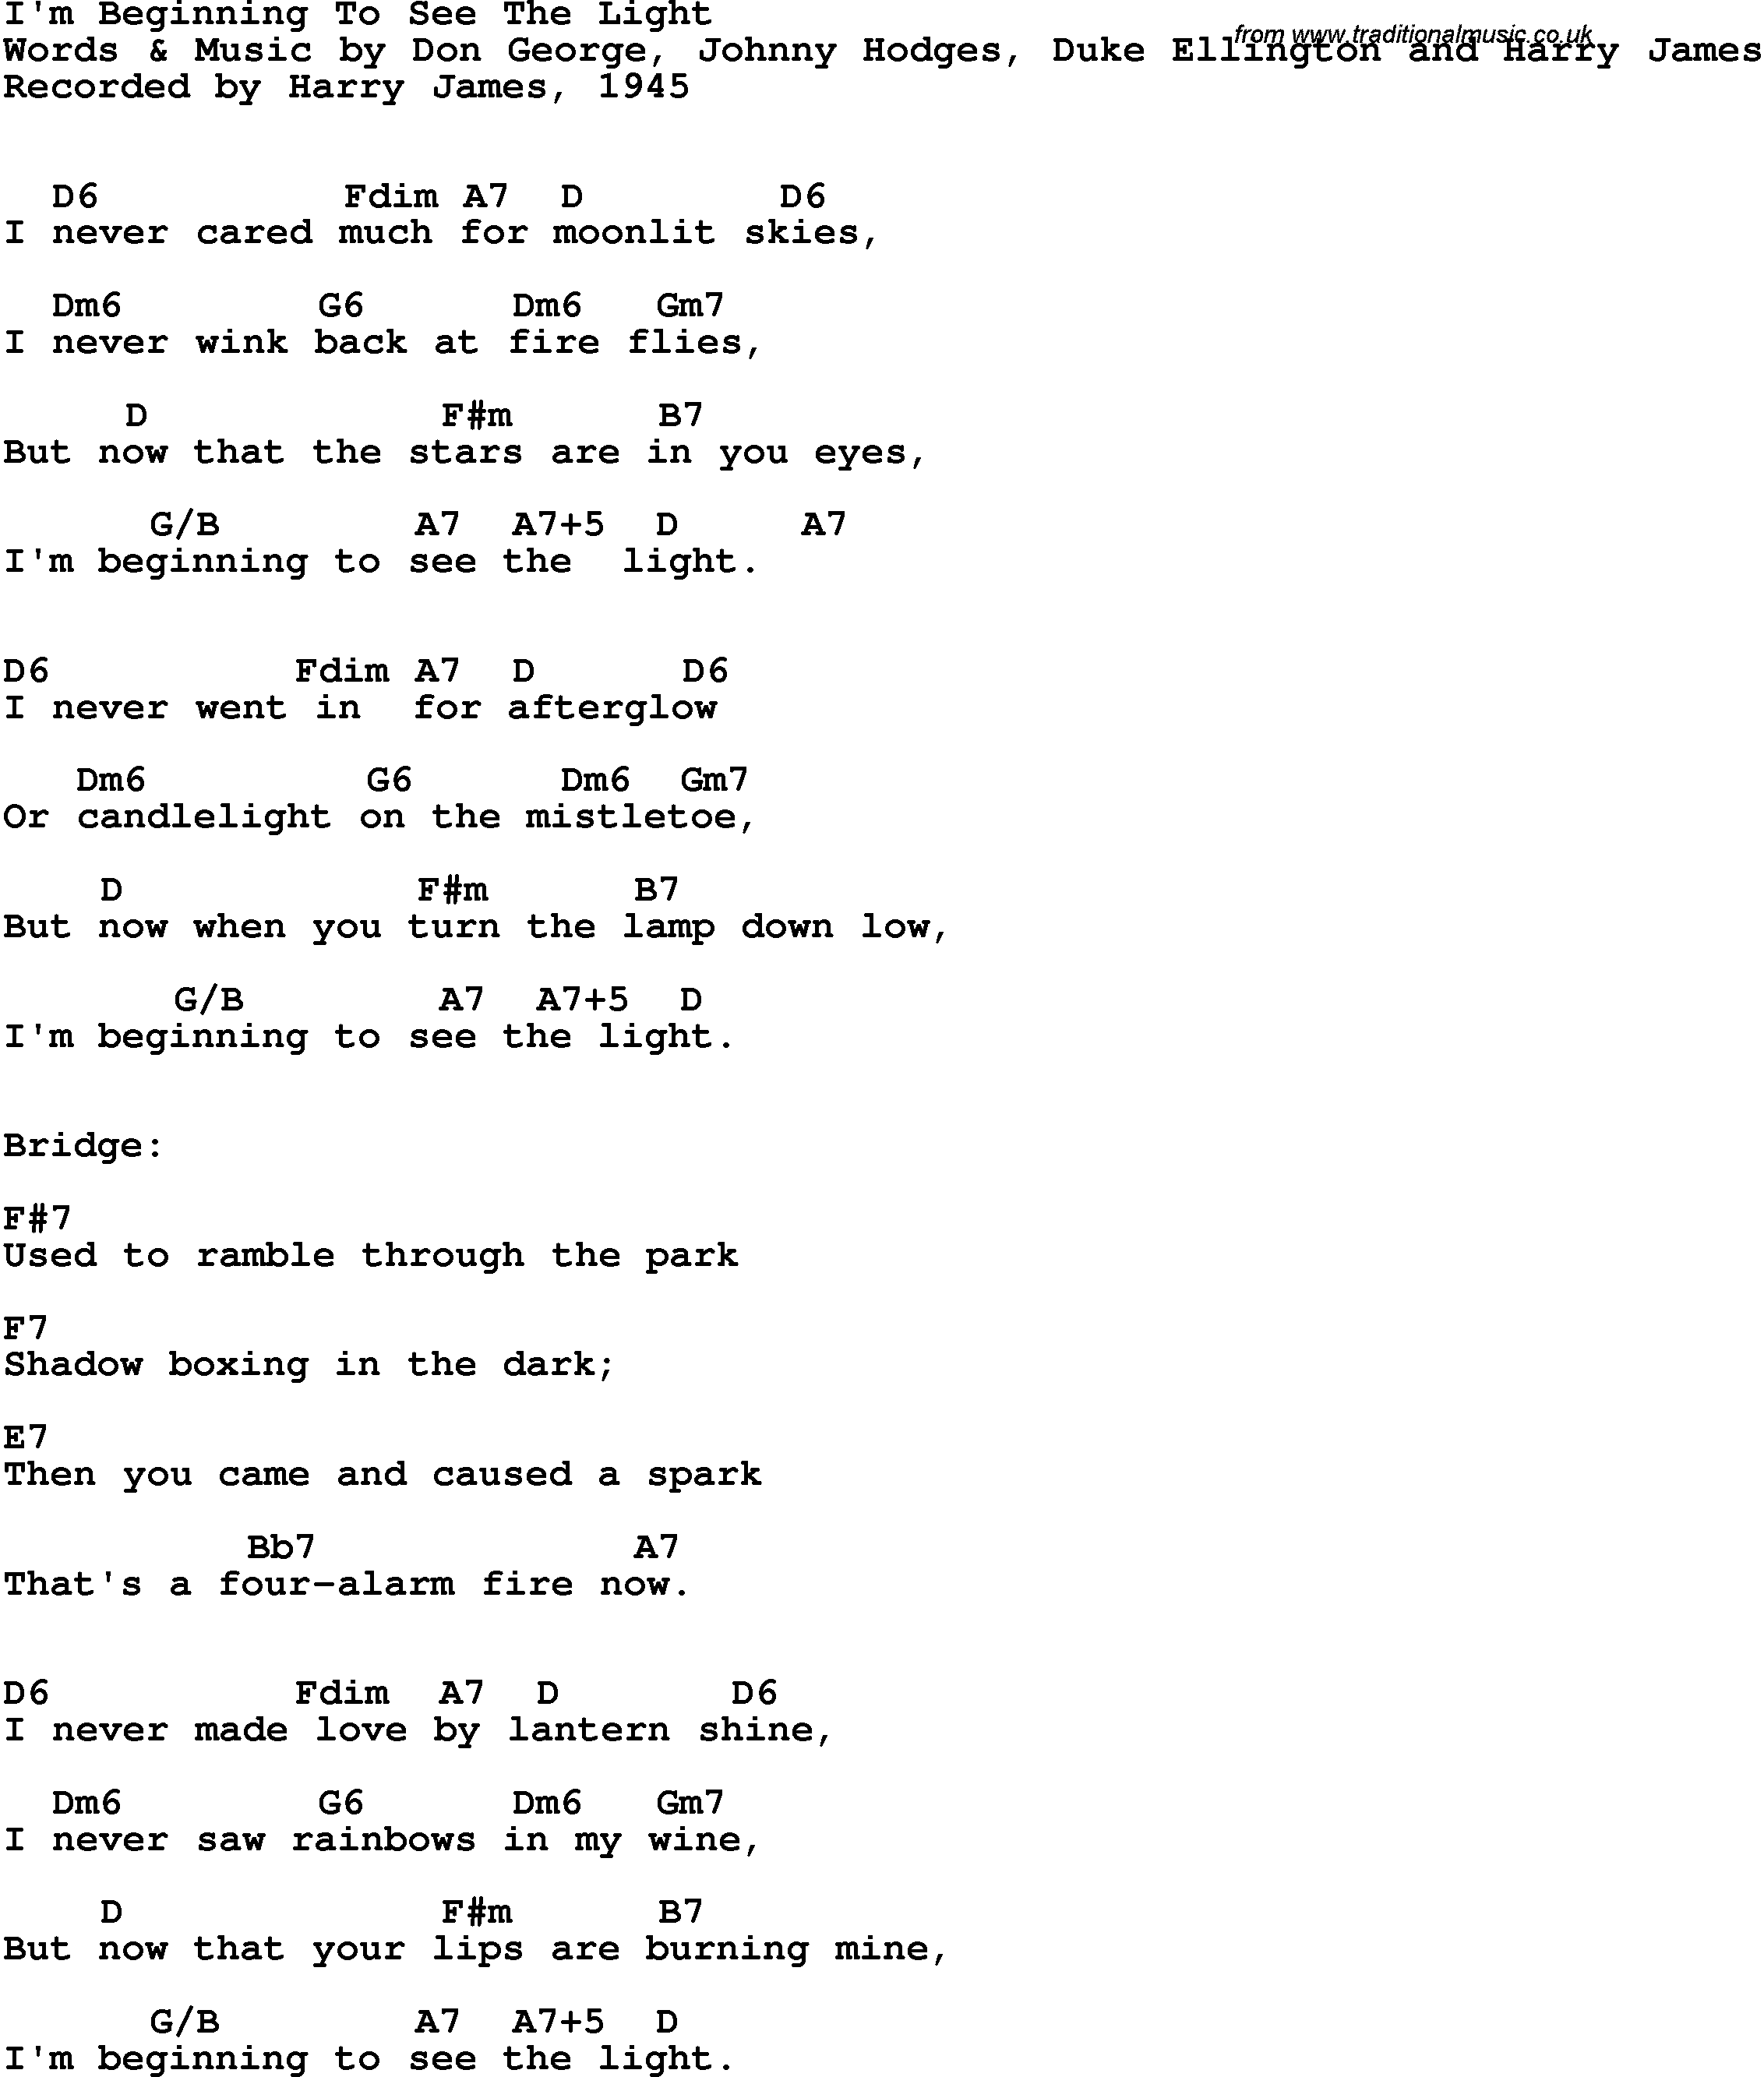 Song Lyrics with guitar chords for I'm Beginning To See The Light - Harry James, 1945